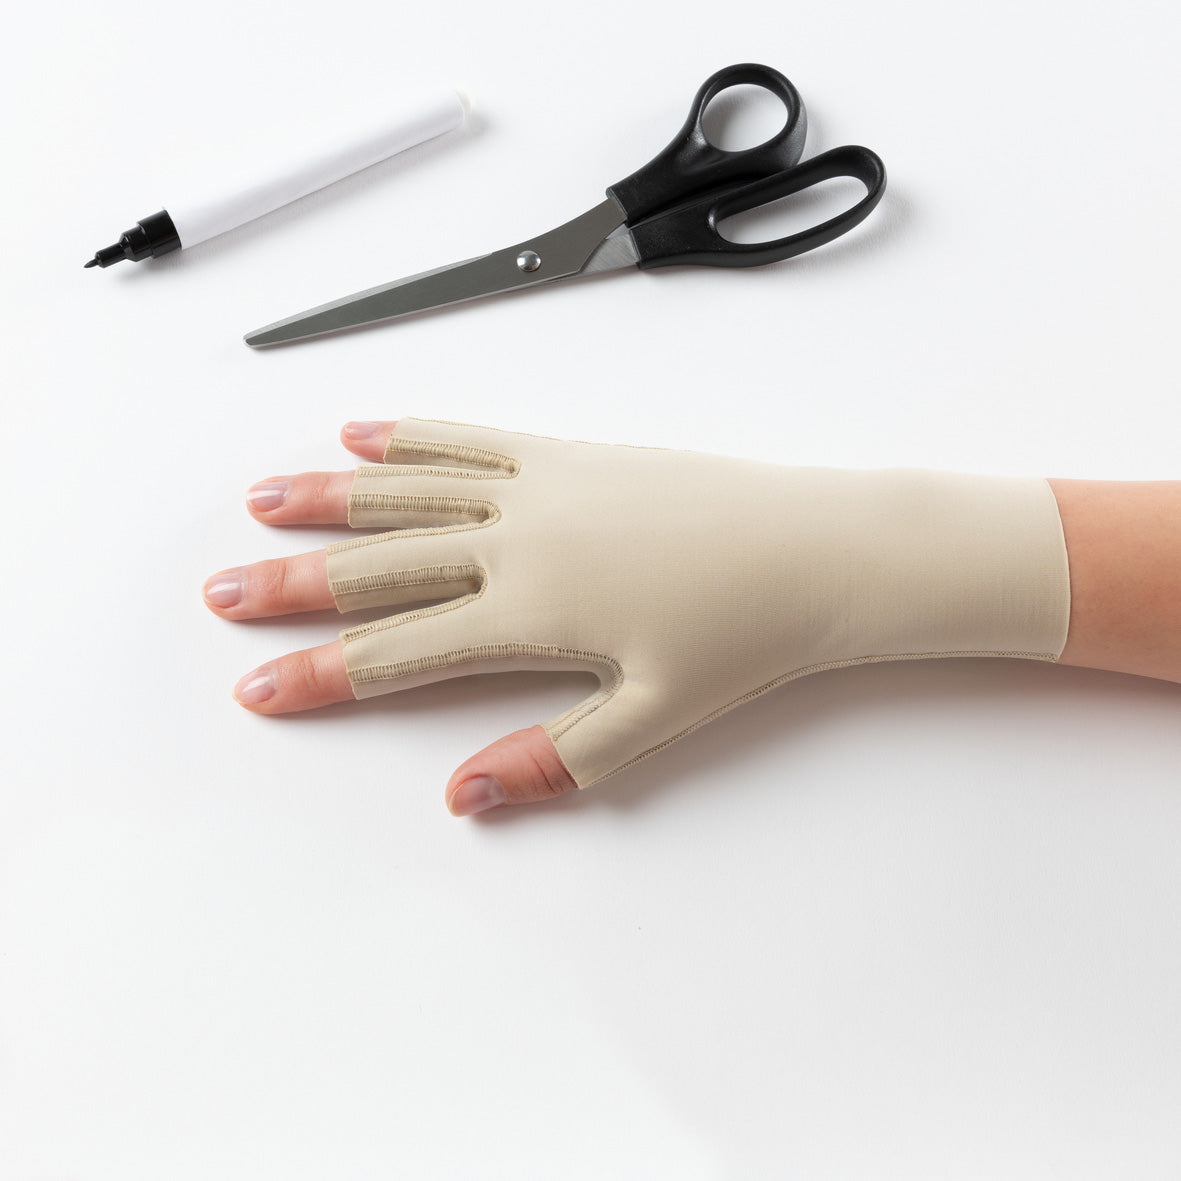 CircAid Reduction Kit Glove - Trimmable